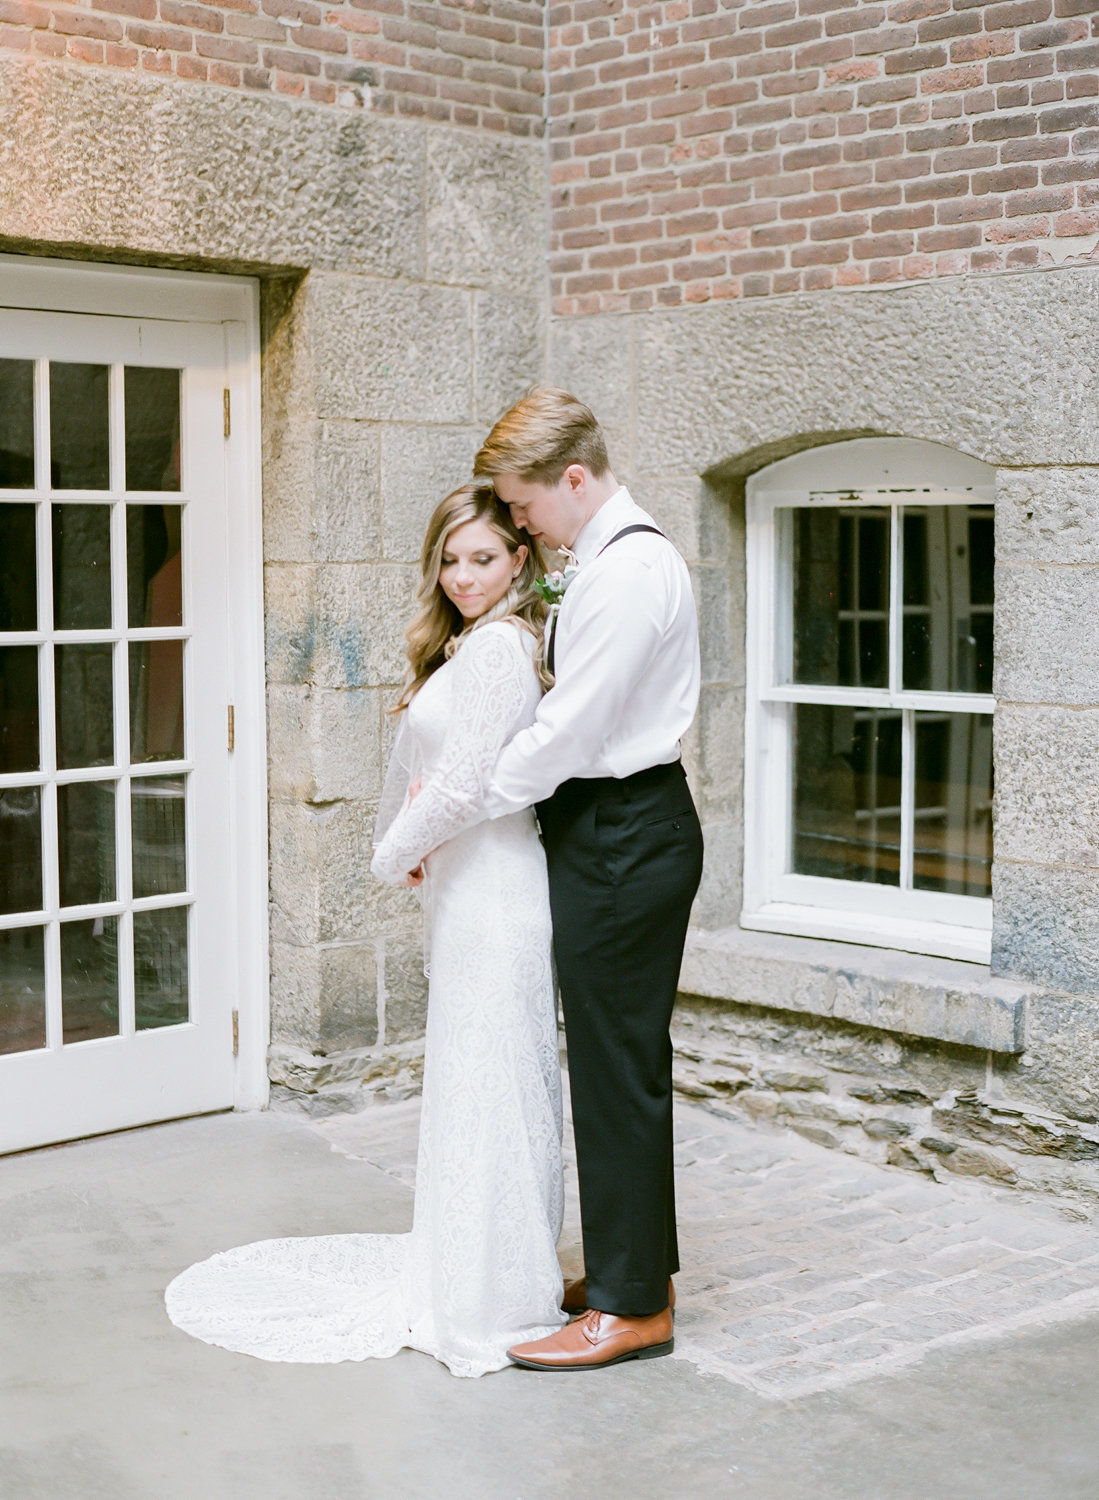 Jacqueline Anne Photography - Jessica and Aaron in Halifax-59